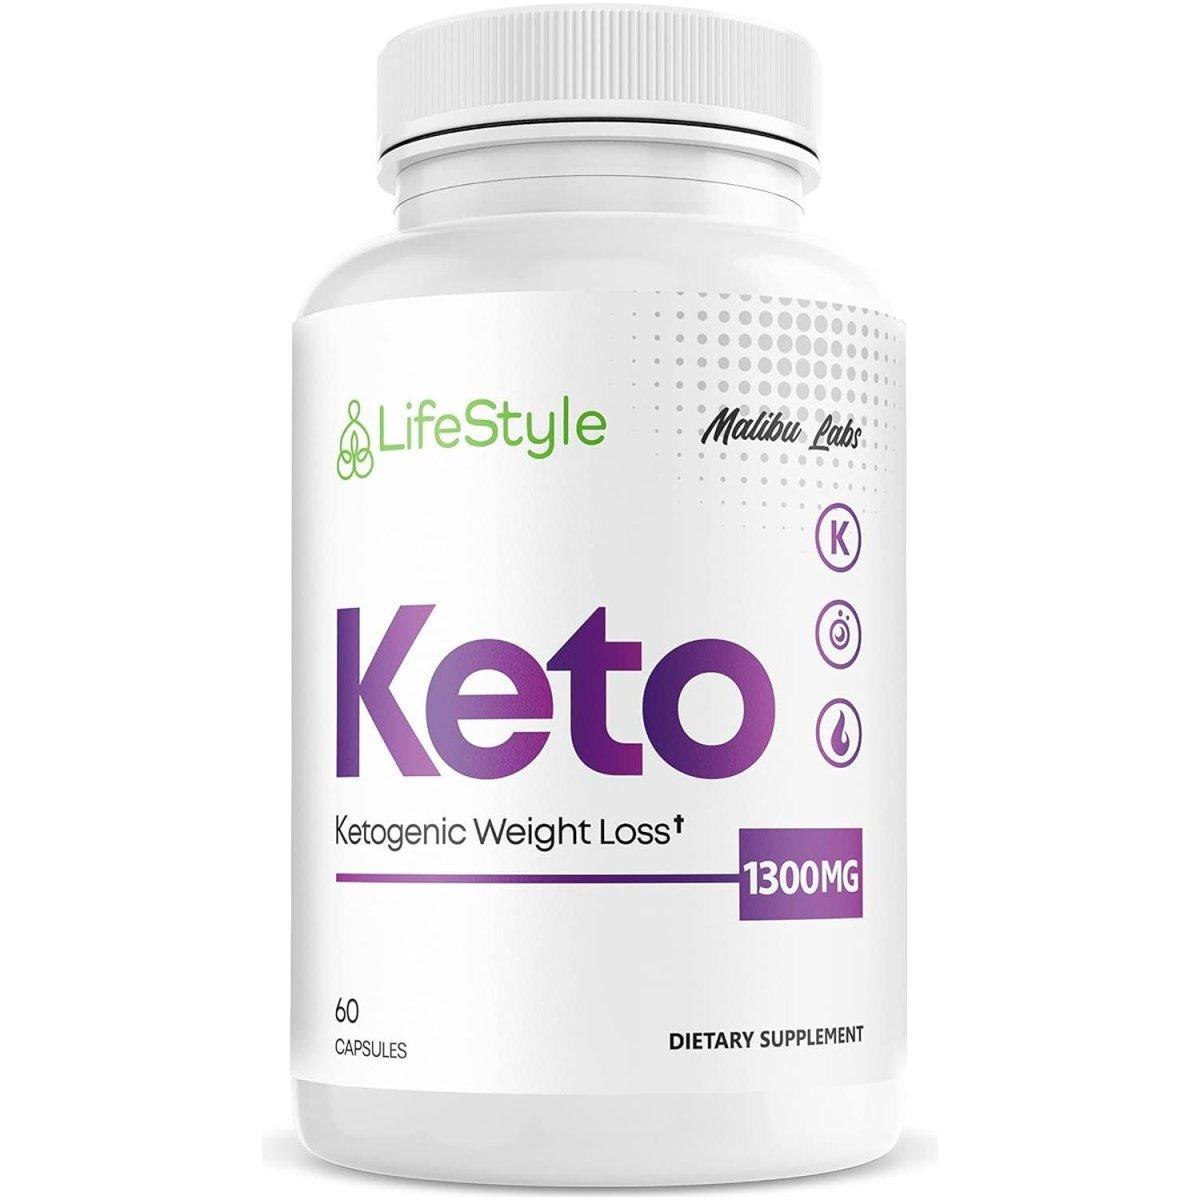 Lifestyle Keto Strong Advanced Formula 1300Mg, Made in the USA - 30 Day Supply (60 Capsules) - Glam Global UK